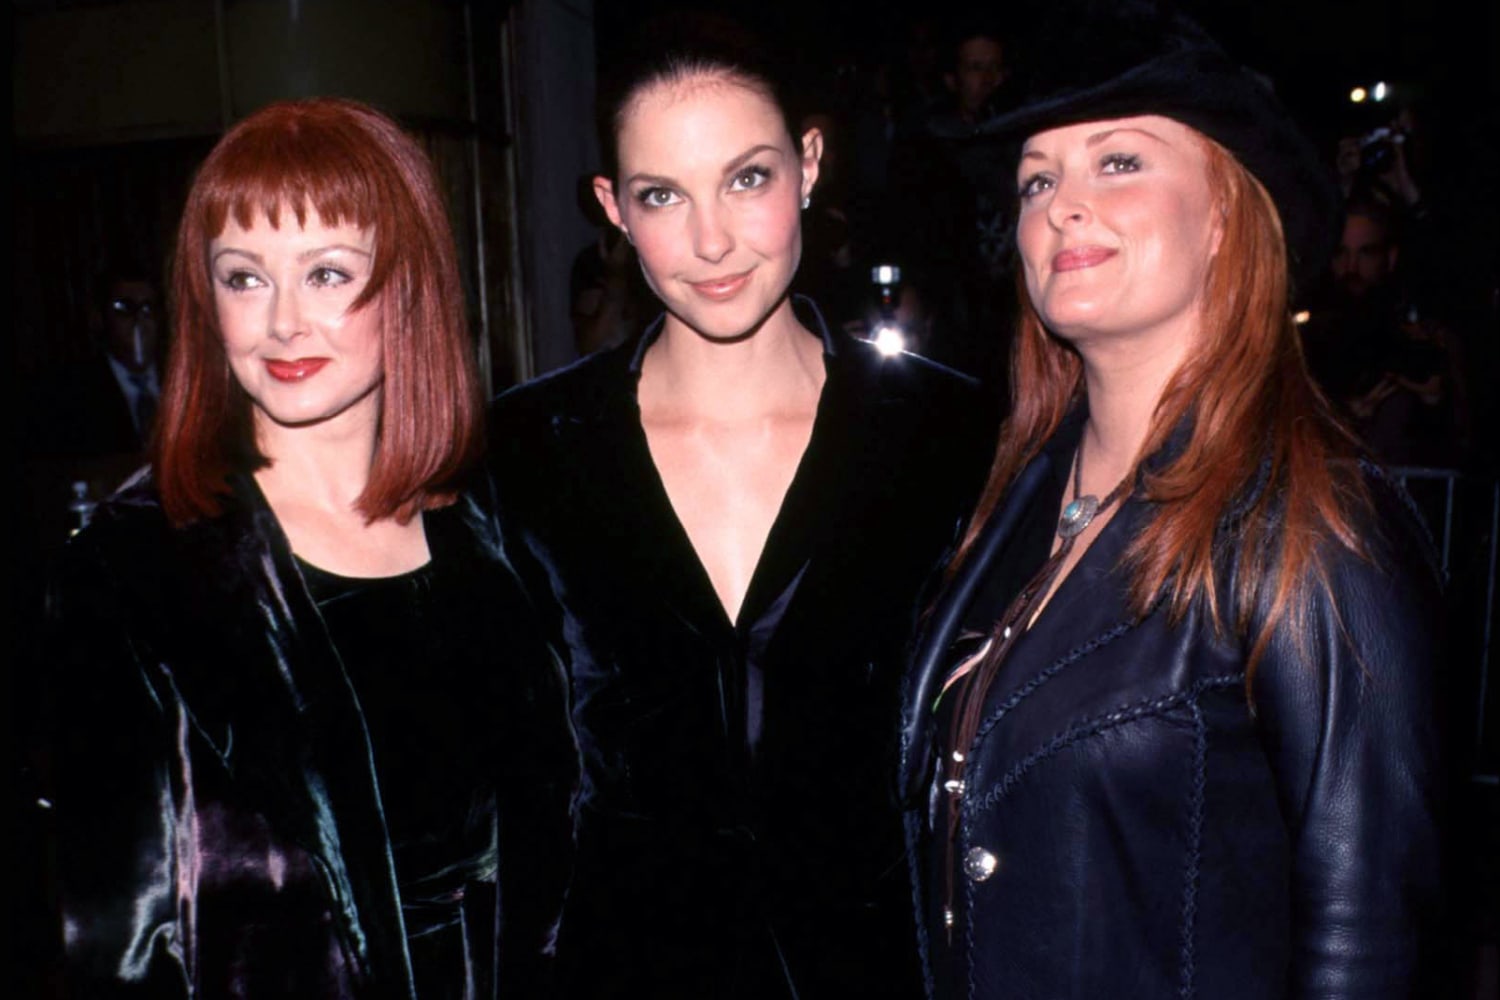 Naomi Judd left daughters Wynonna and Ashley out of her will